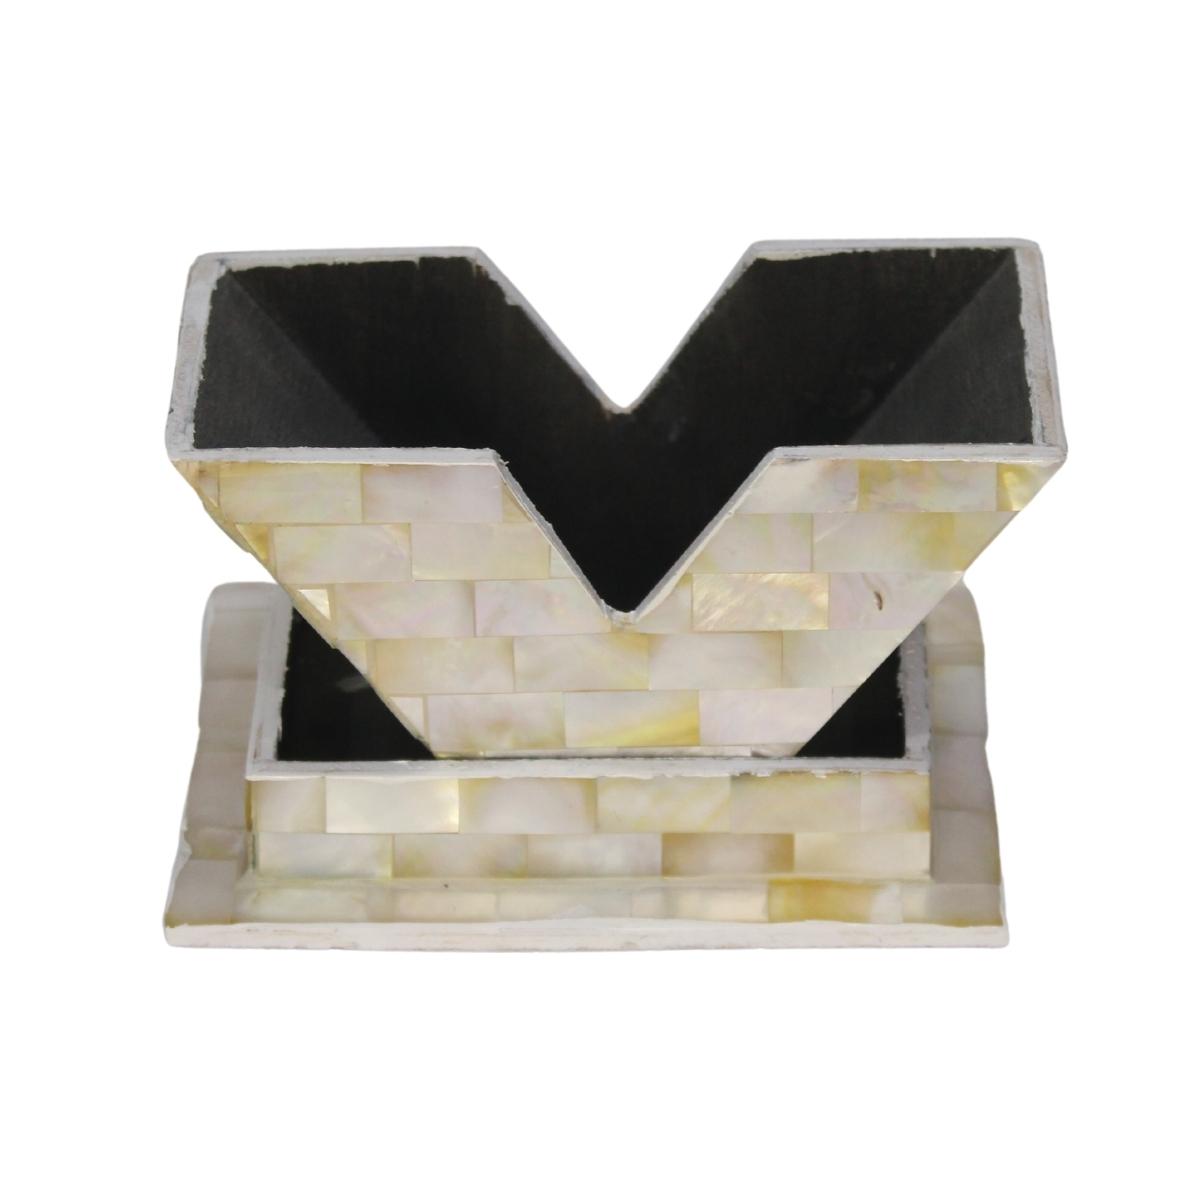 Mother of Pearl(MOP) V Shaped Tissue Paper Holder Seashell Show Pieces for Home Decor Item-Maya Bazaar